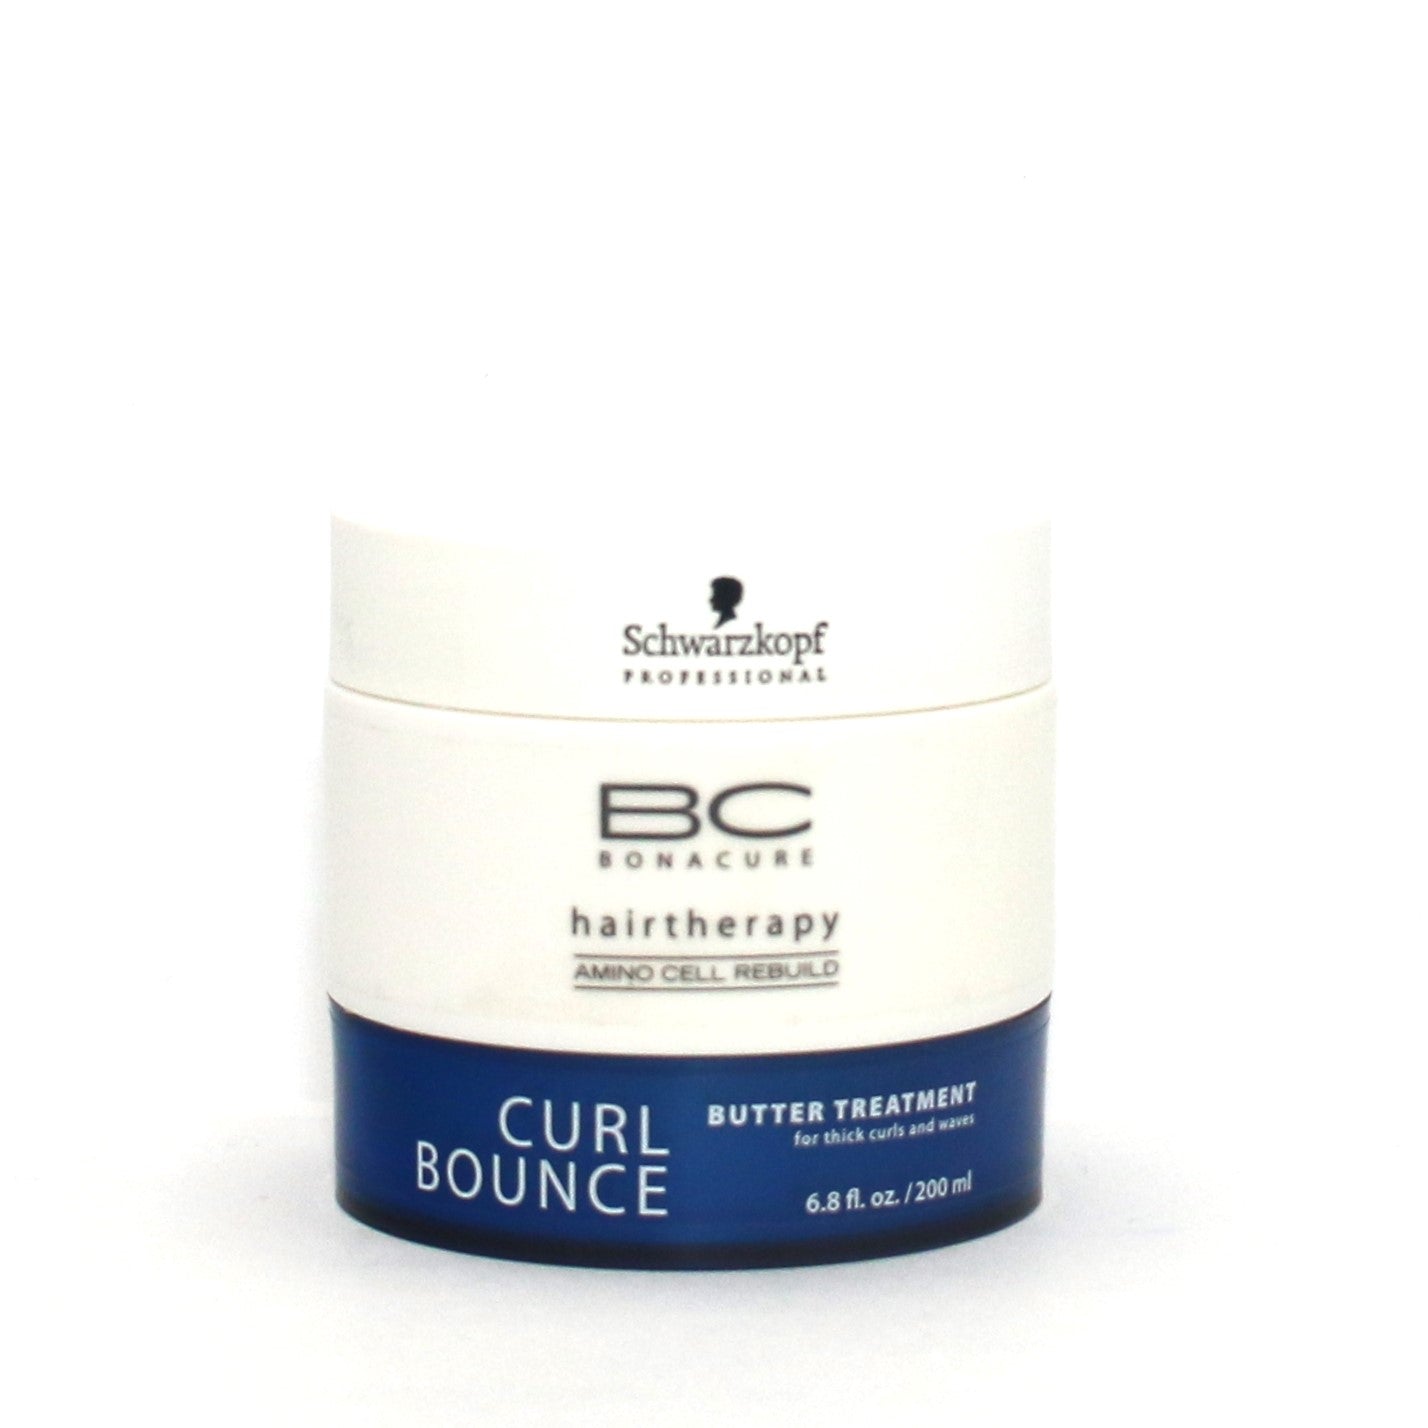 SCHWARZKOPF BC Bonacure Hair Therapy Curl Bounce Butter Treatment 6.8 oz